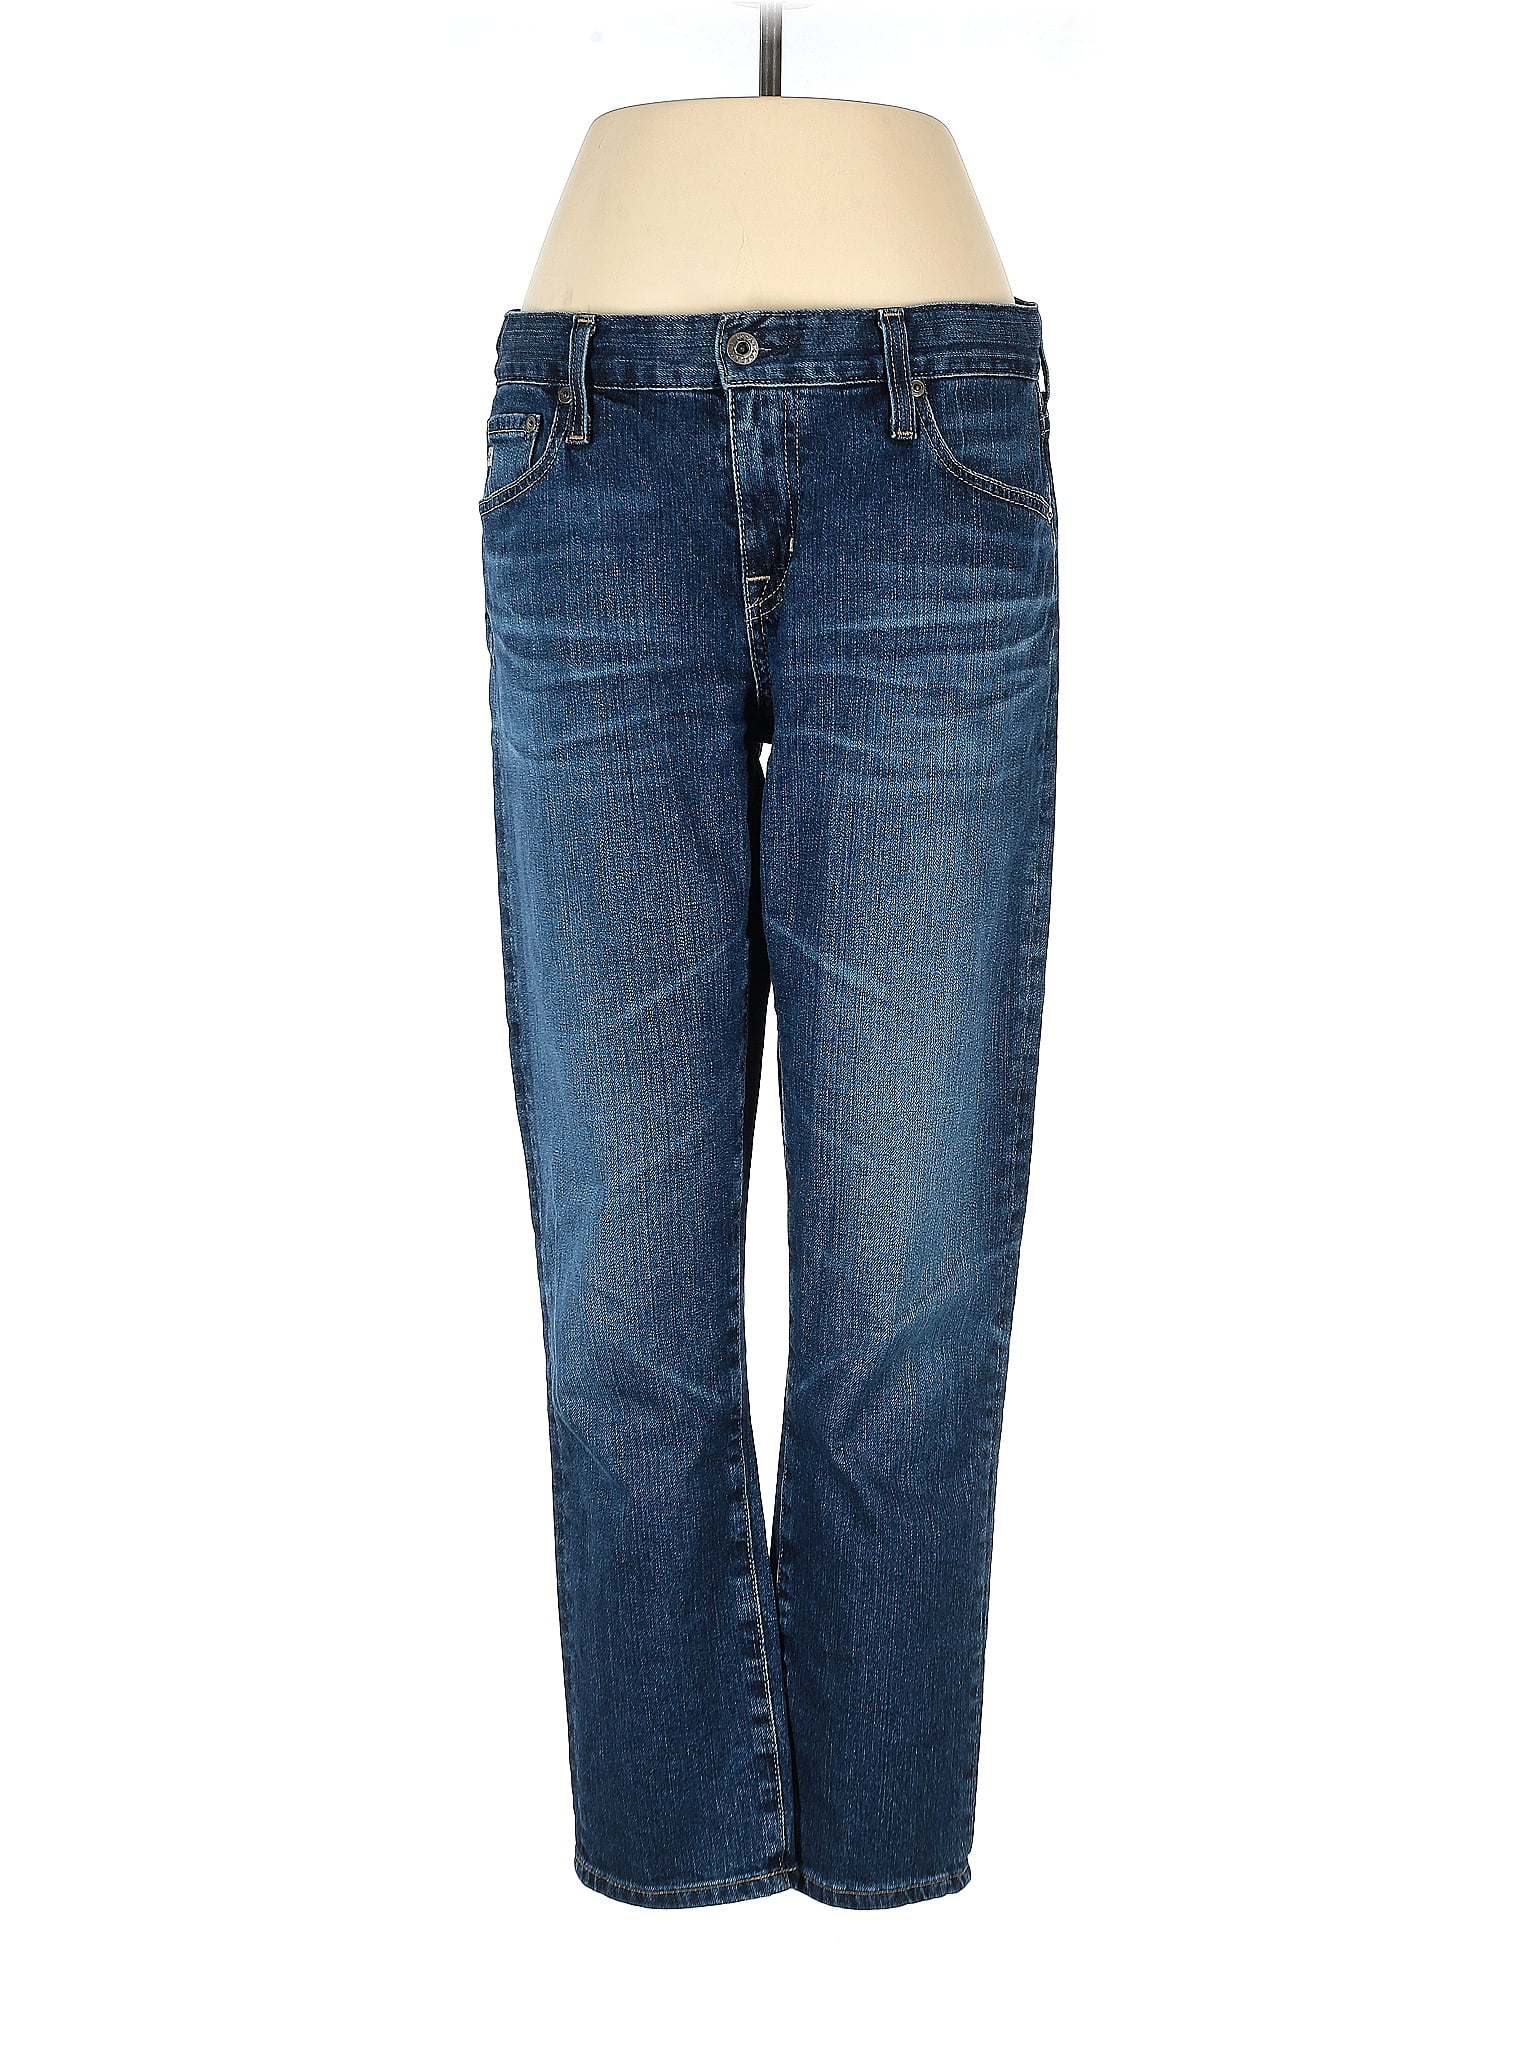 Adriano Goldschmied Solid Blue Jeans 28 Waist - 81% off | thredUP